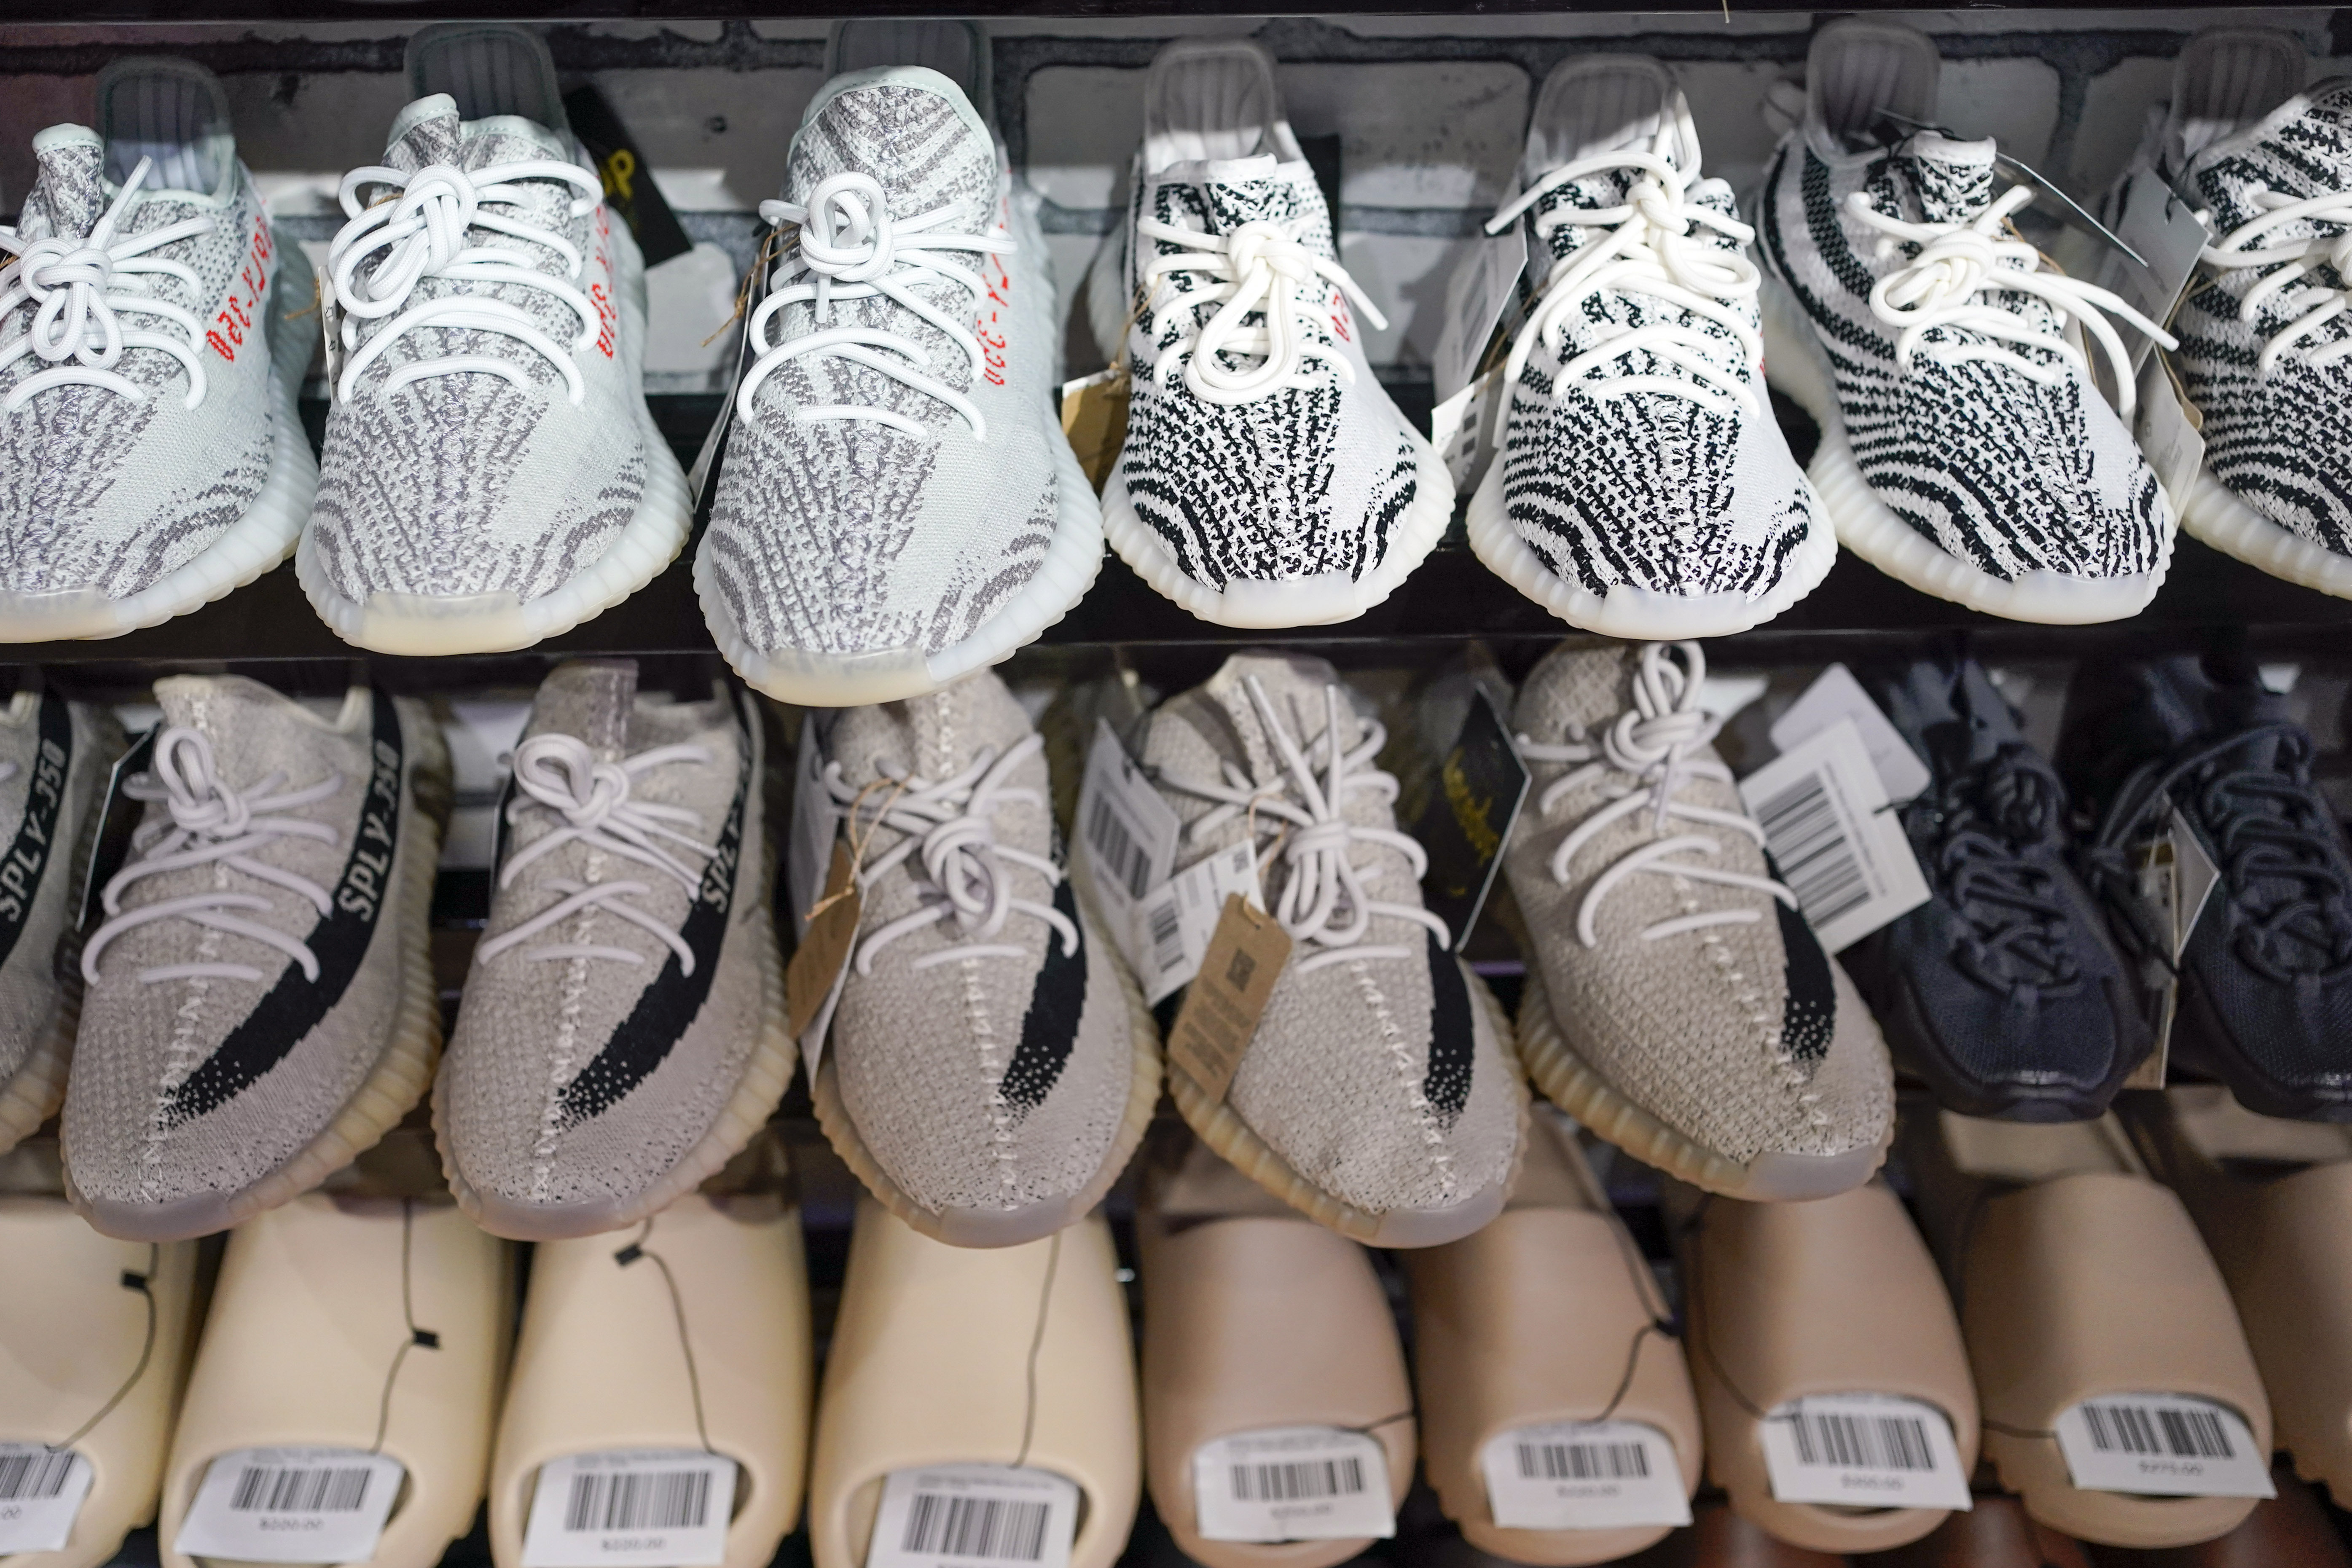 Adidas to sell more surplus Yeezy sneakers, clearing stock from scuttled -